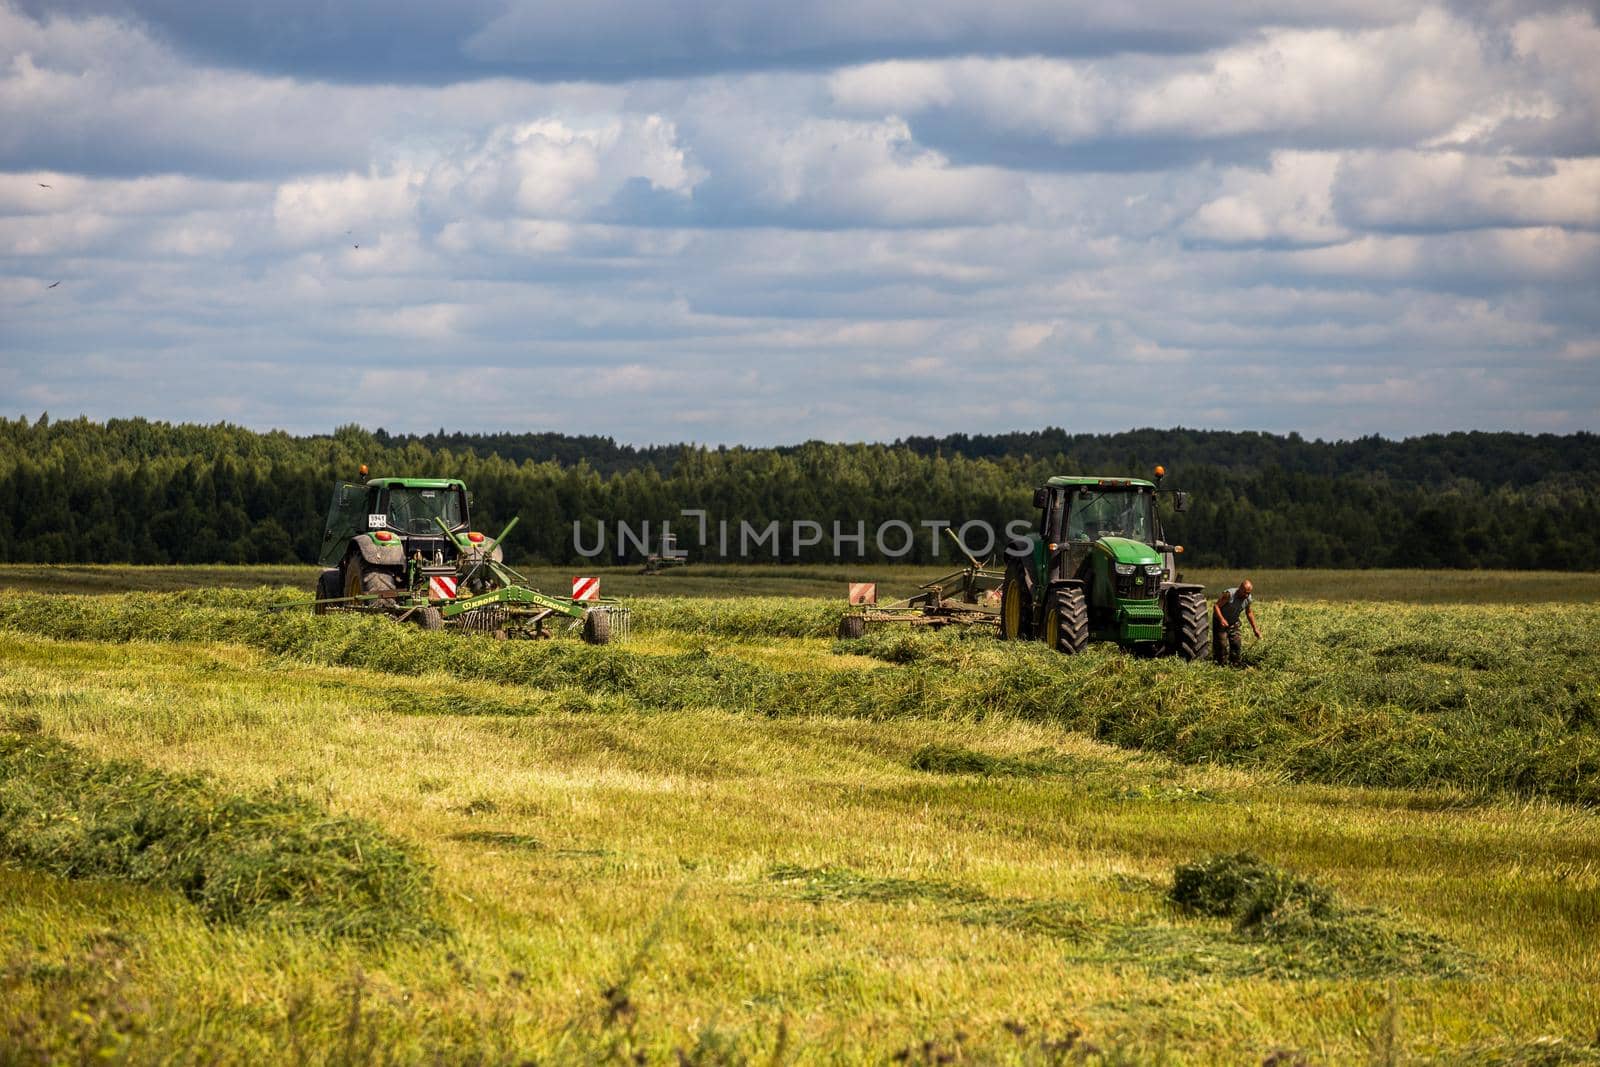 two green haymaking John Deere tractors with Krone plow on summer field before storm - telephoto shot with selective focus in Tula, Russia - July 30, 2019